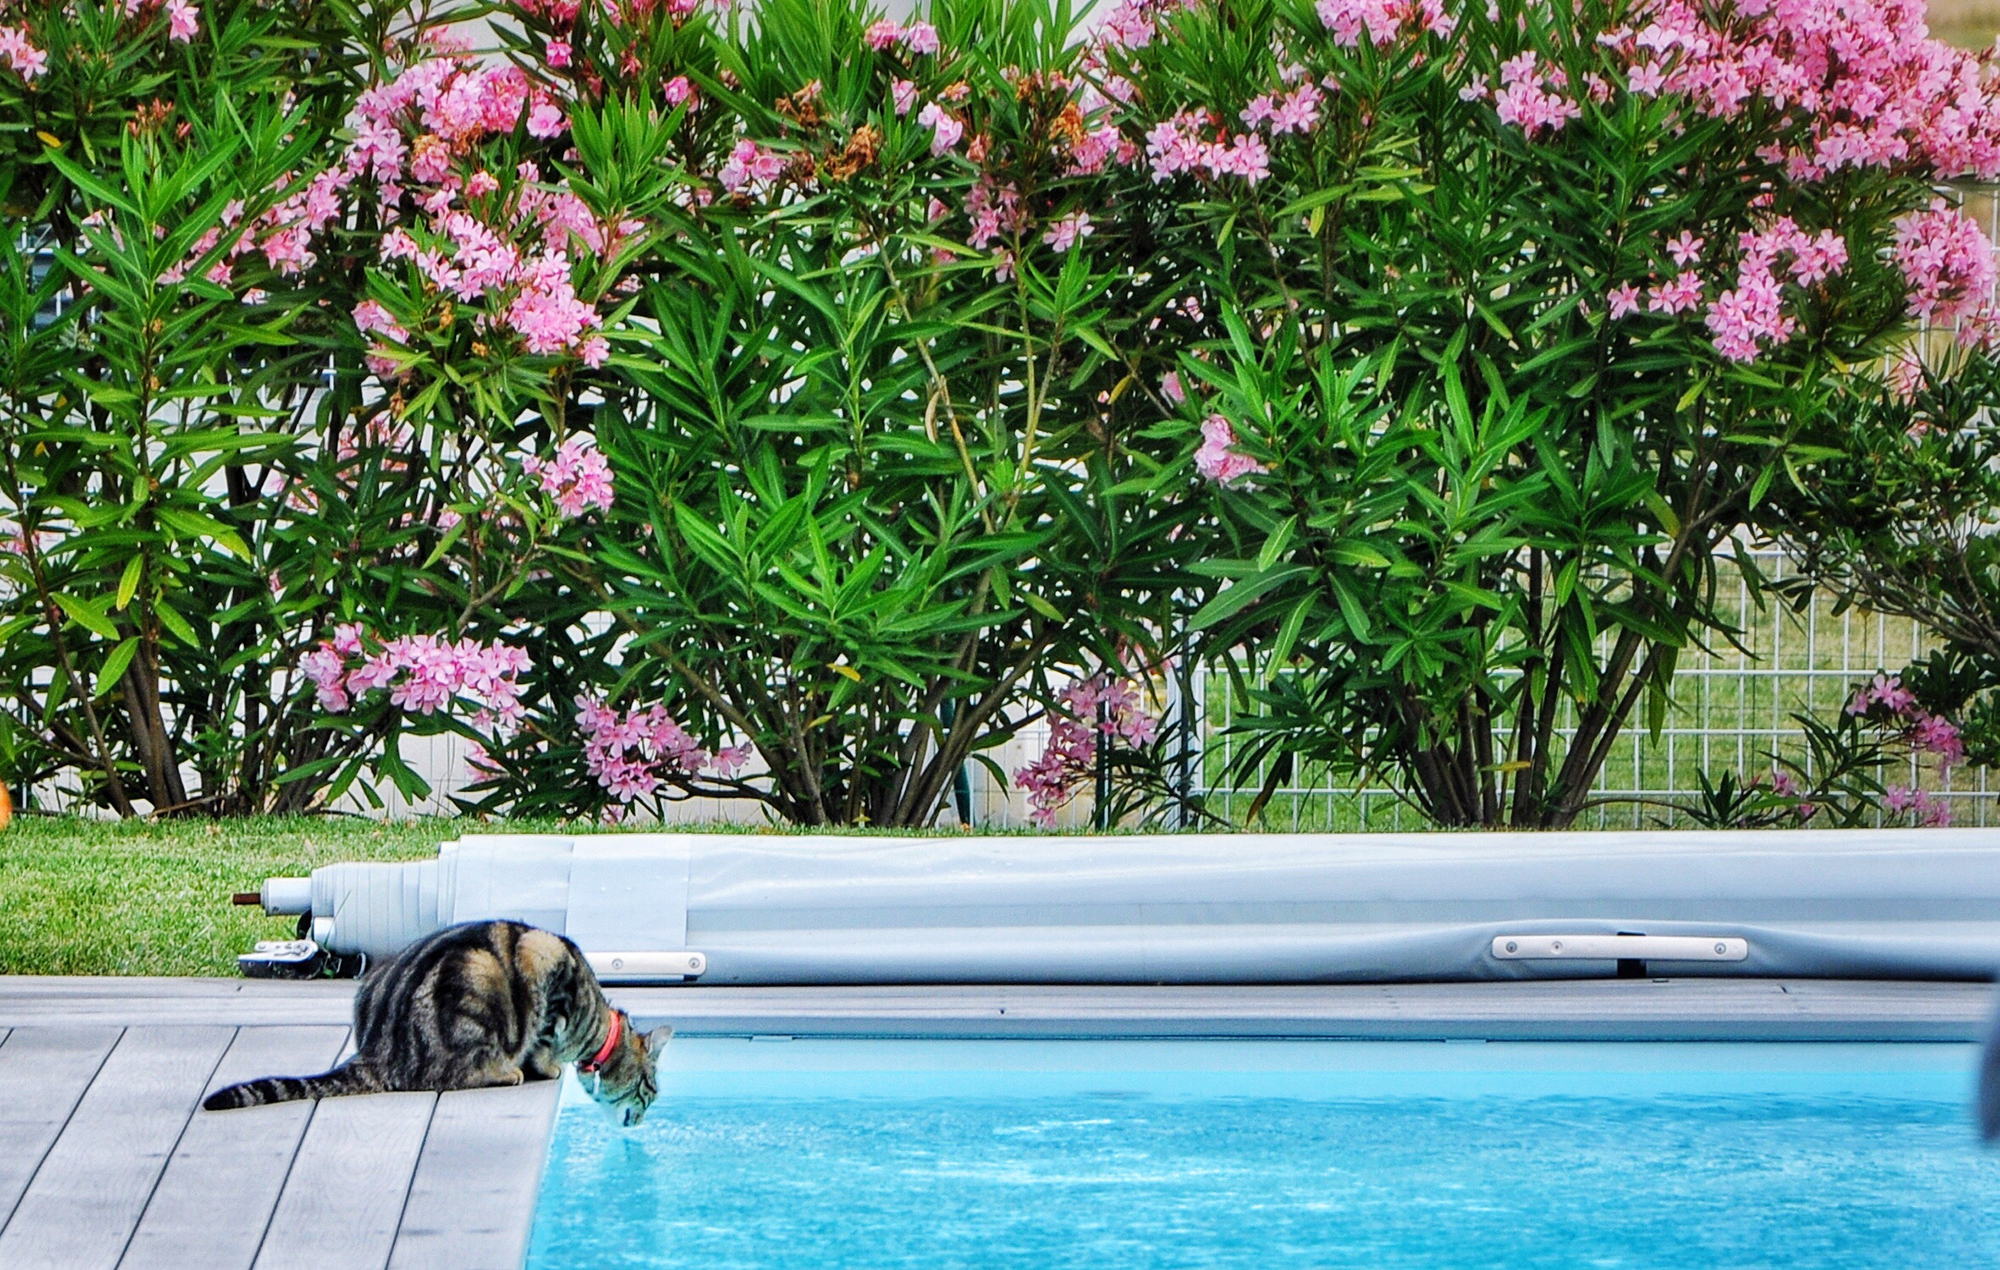 Cat Drinking Water In Swimming Pool Against Trees